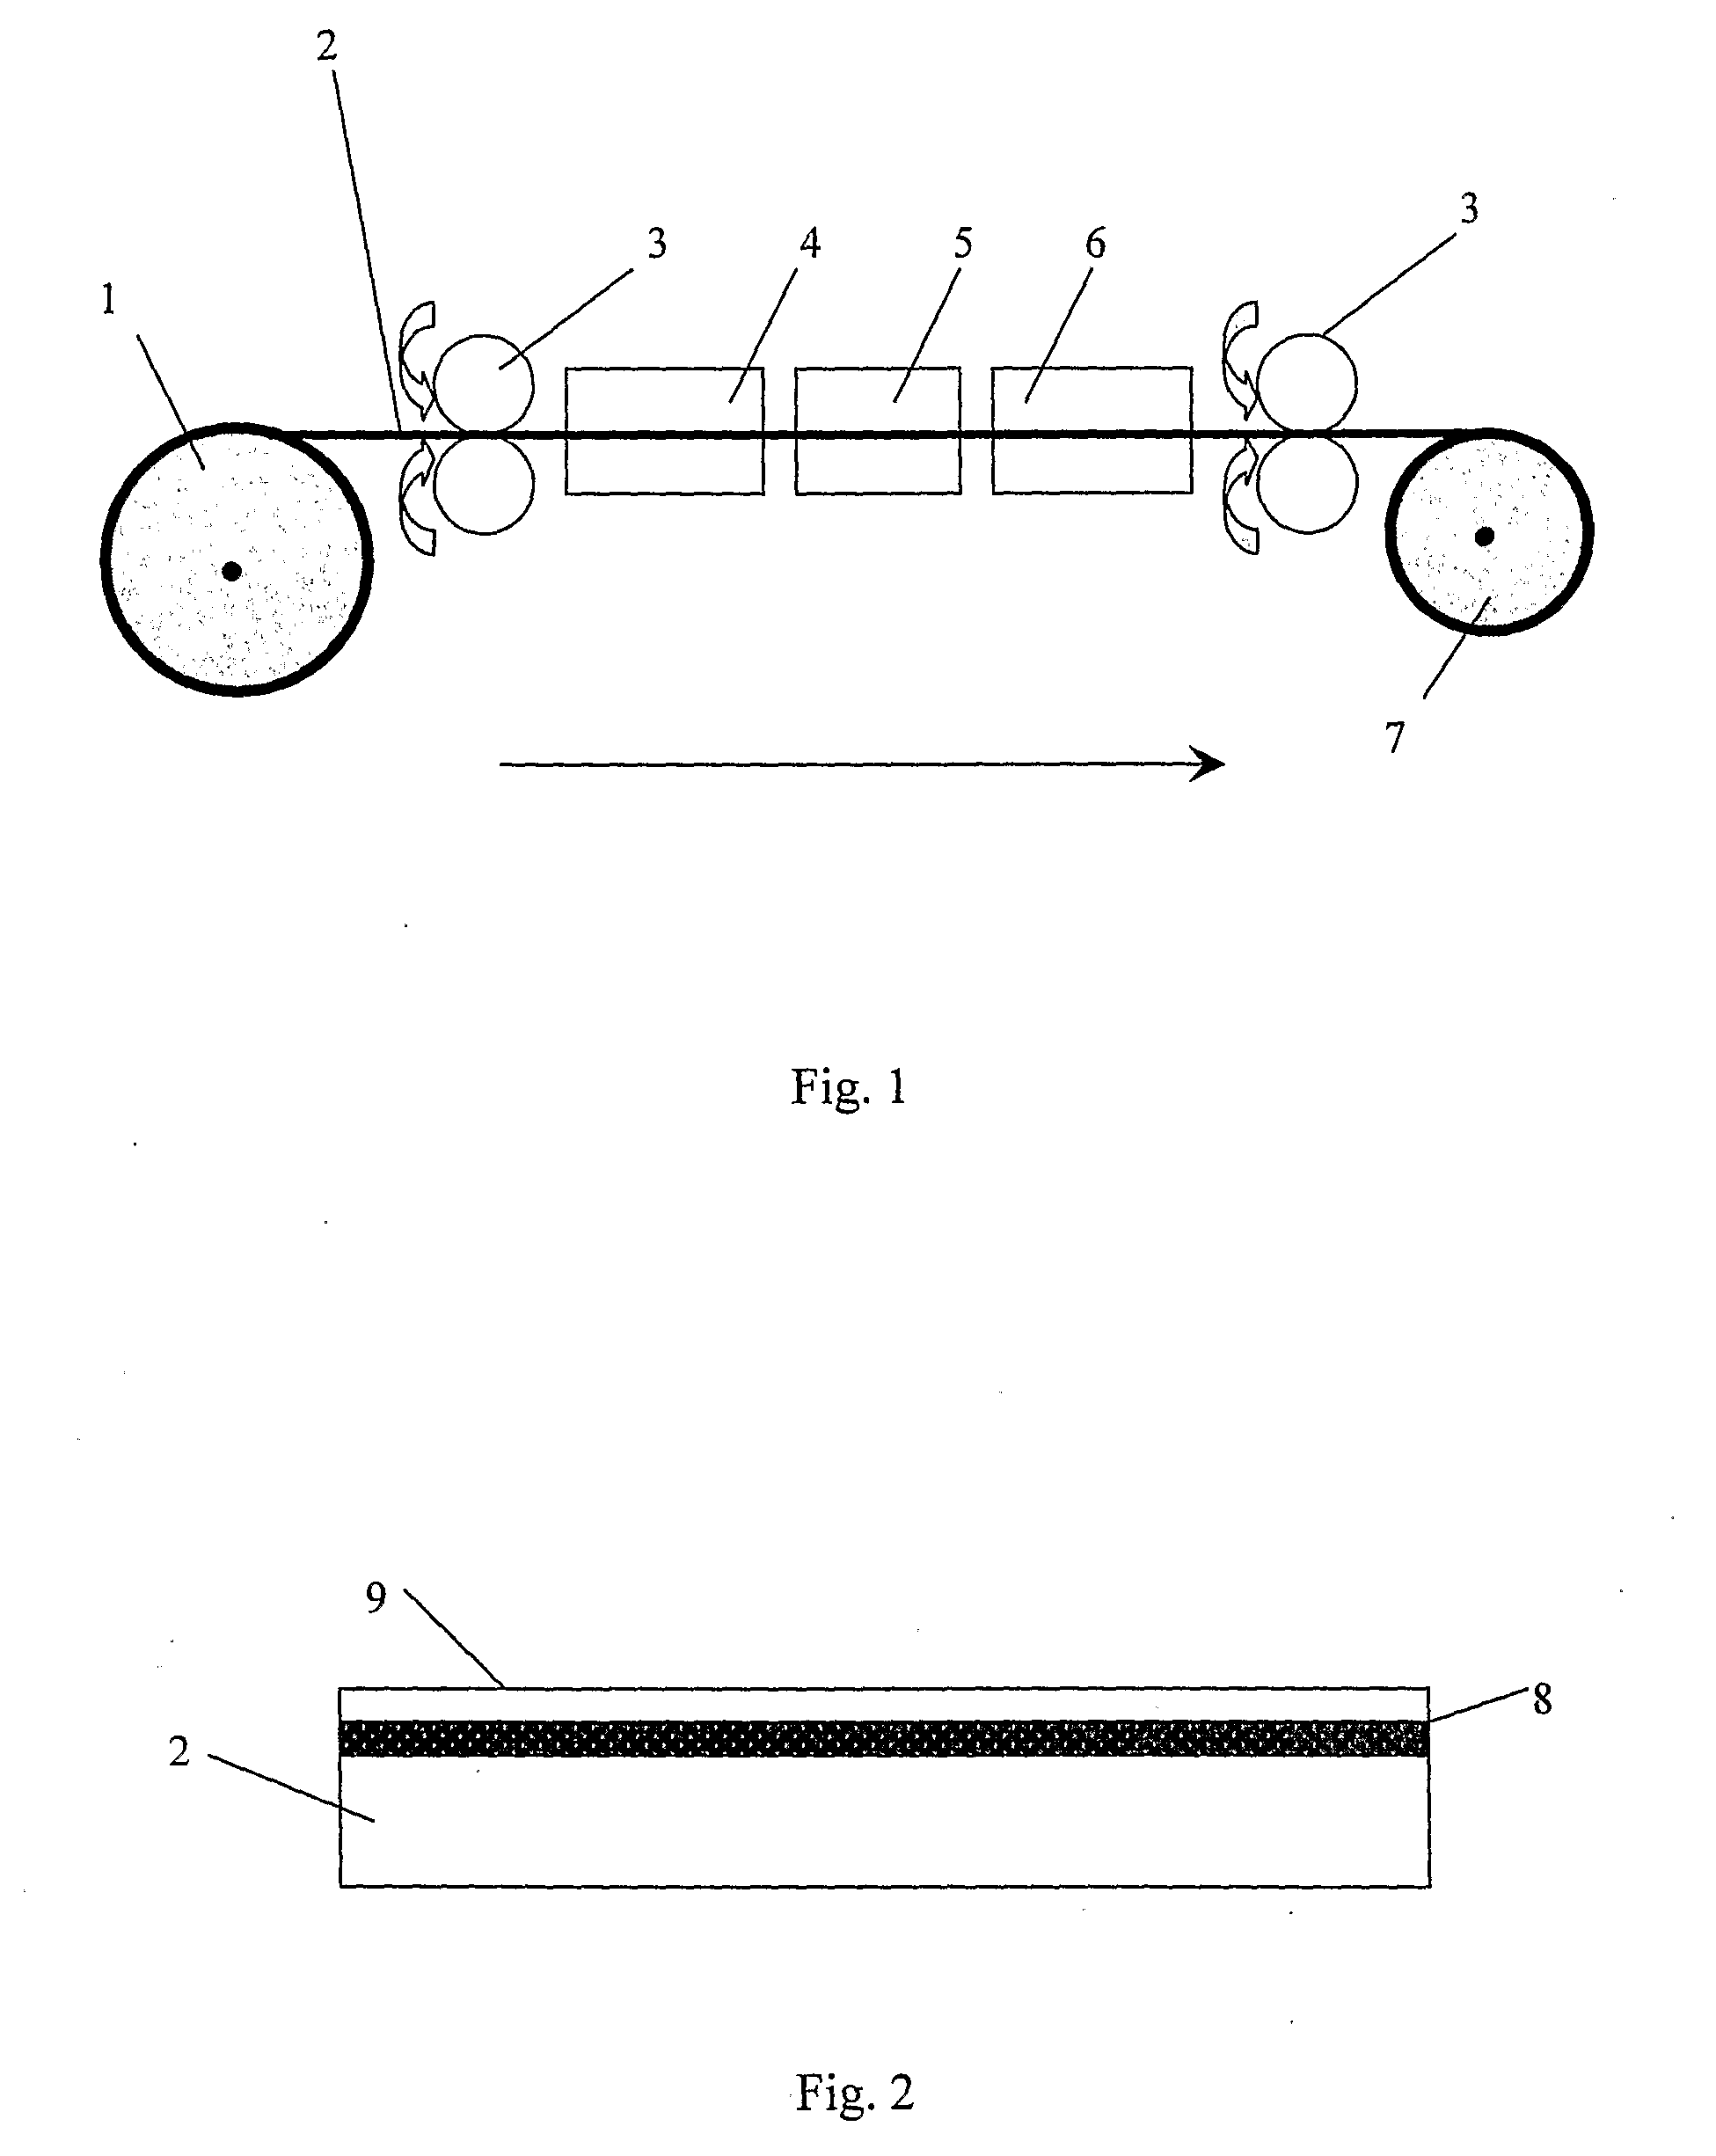 Coated Metal Product, Method to Produce It and Use of the Method